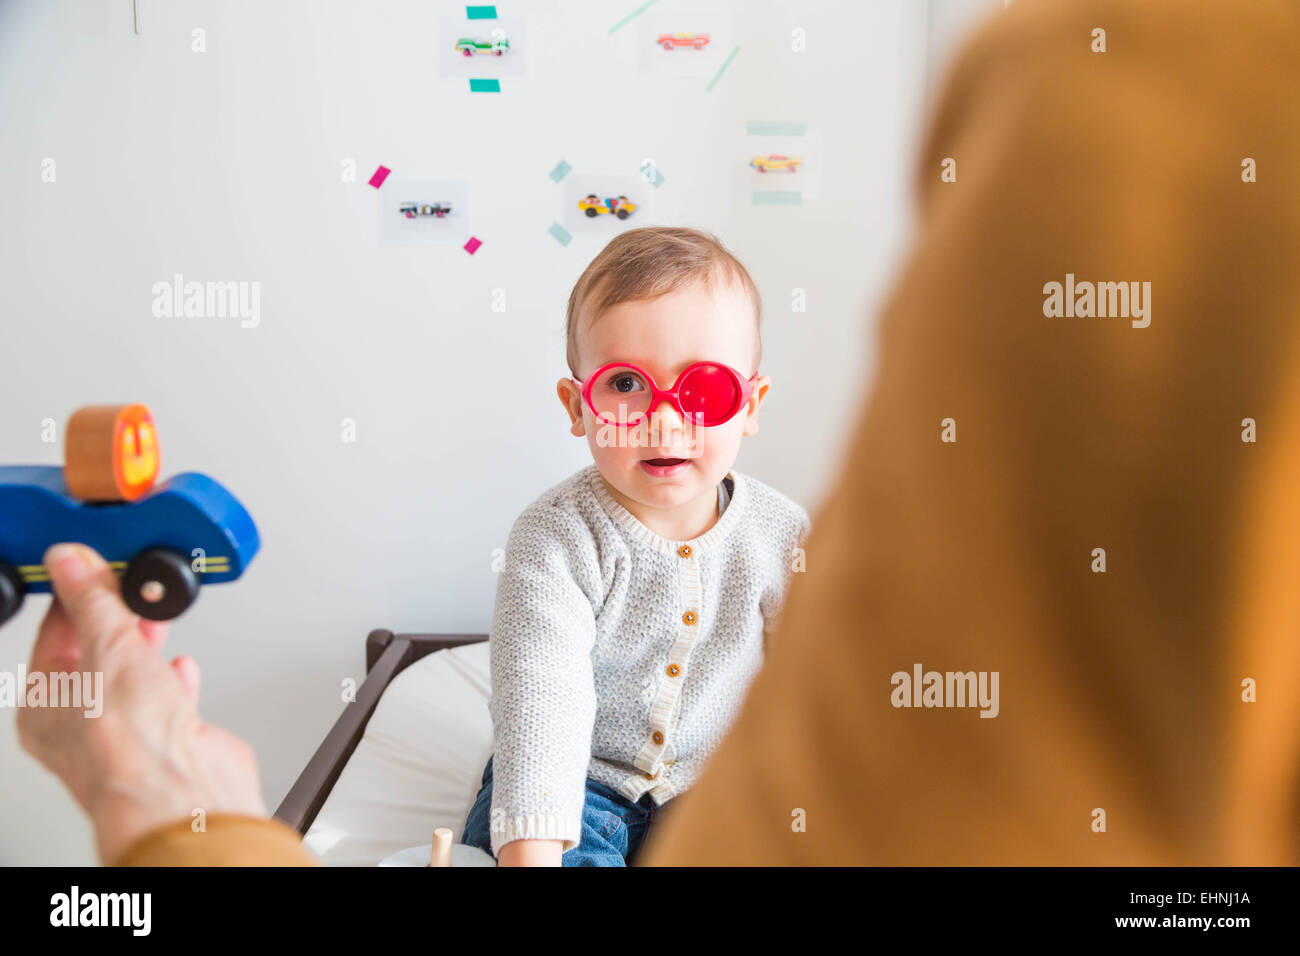 Ophthalmologic examinination of a 18 month-old baby boy. Stock Photo